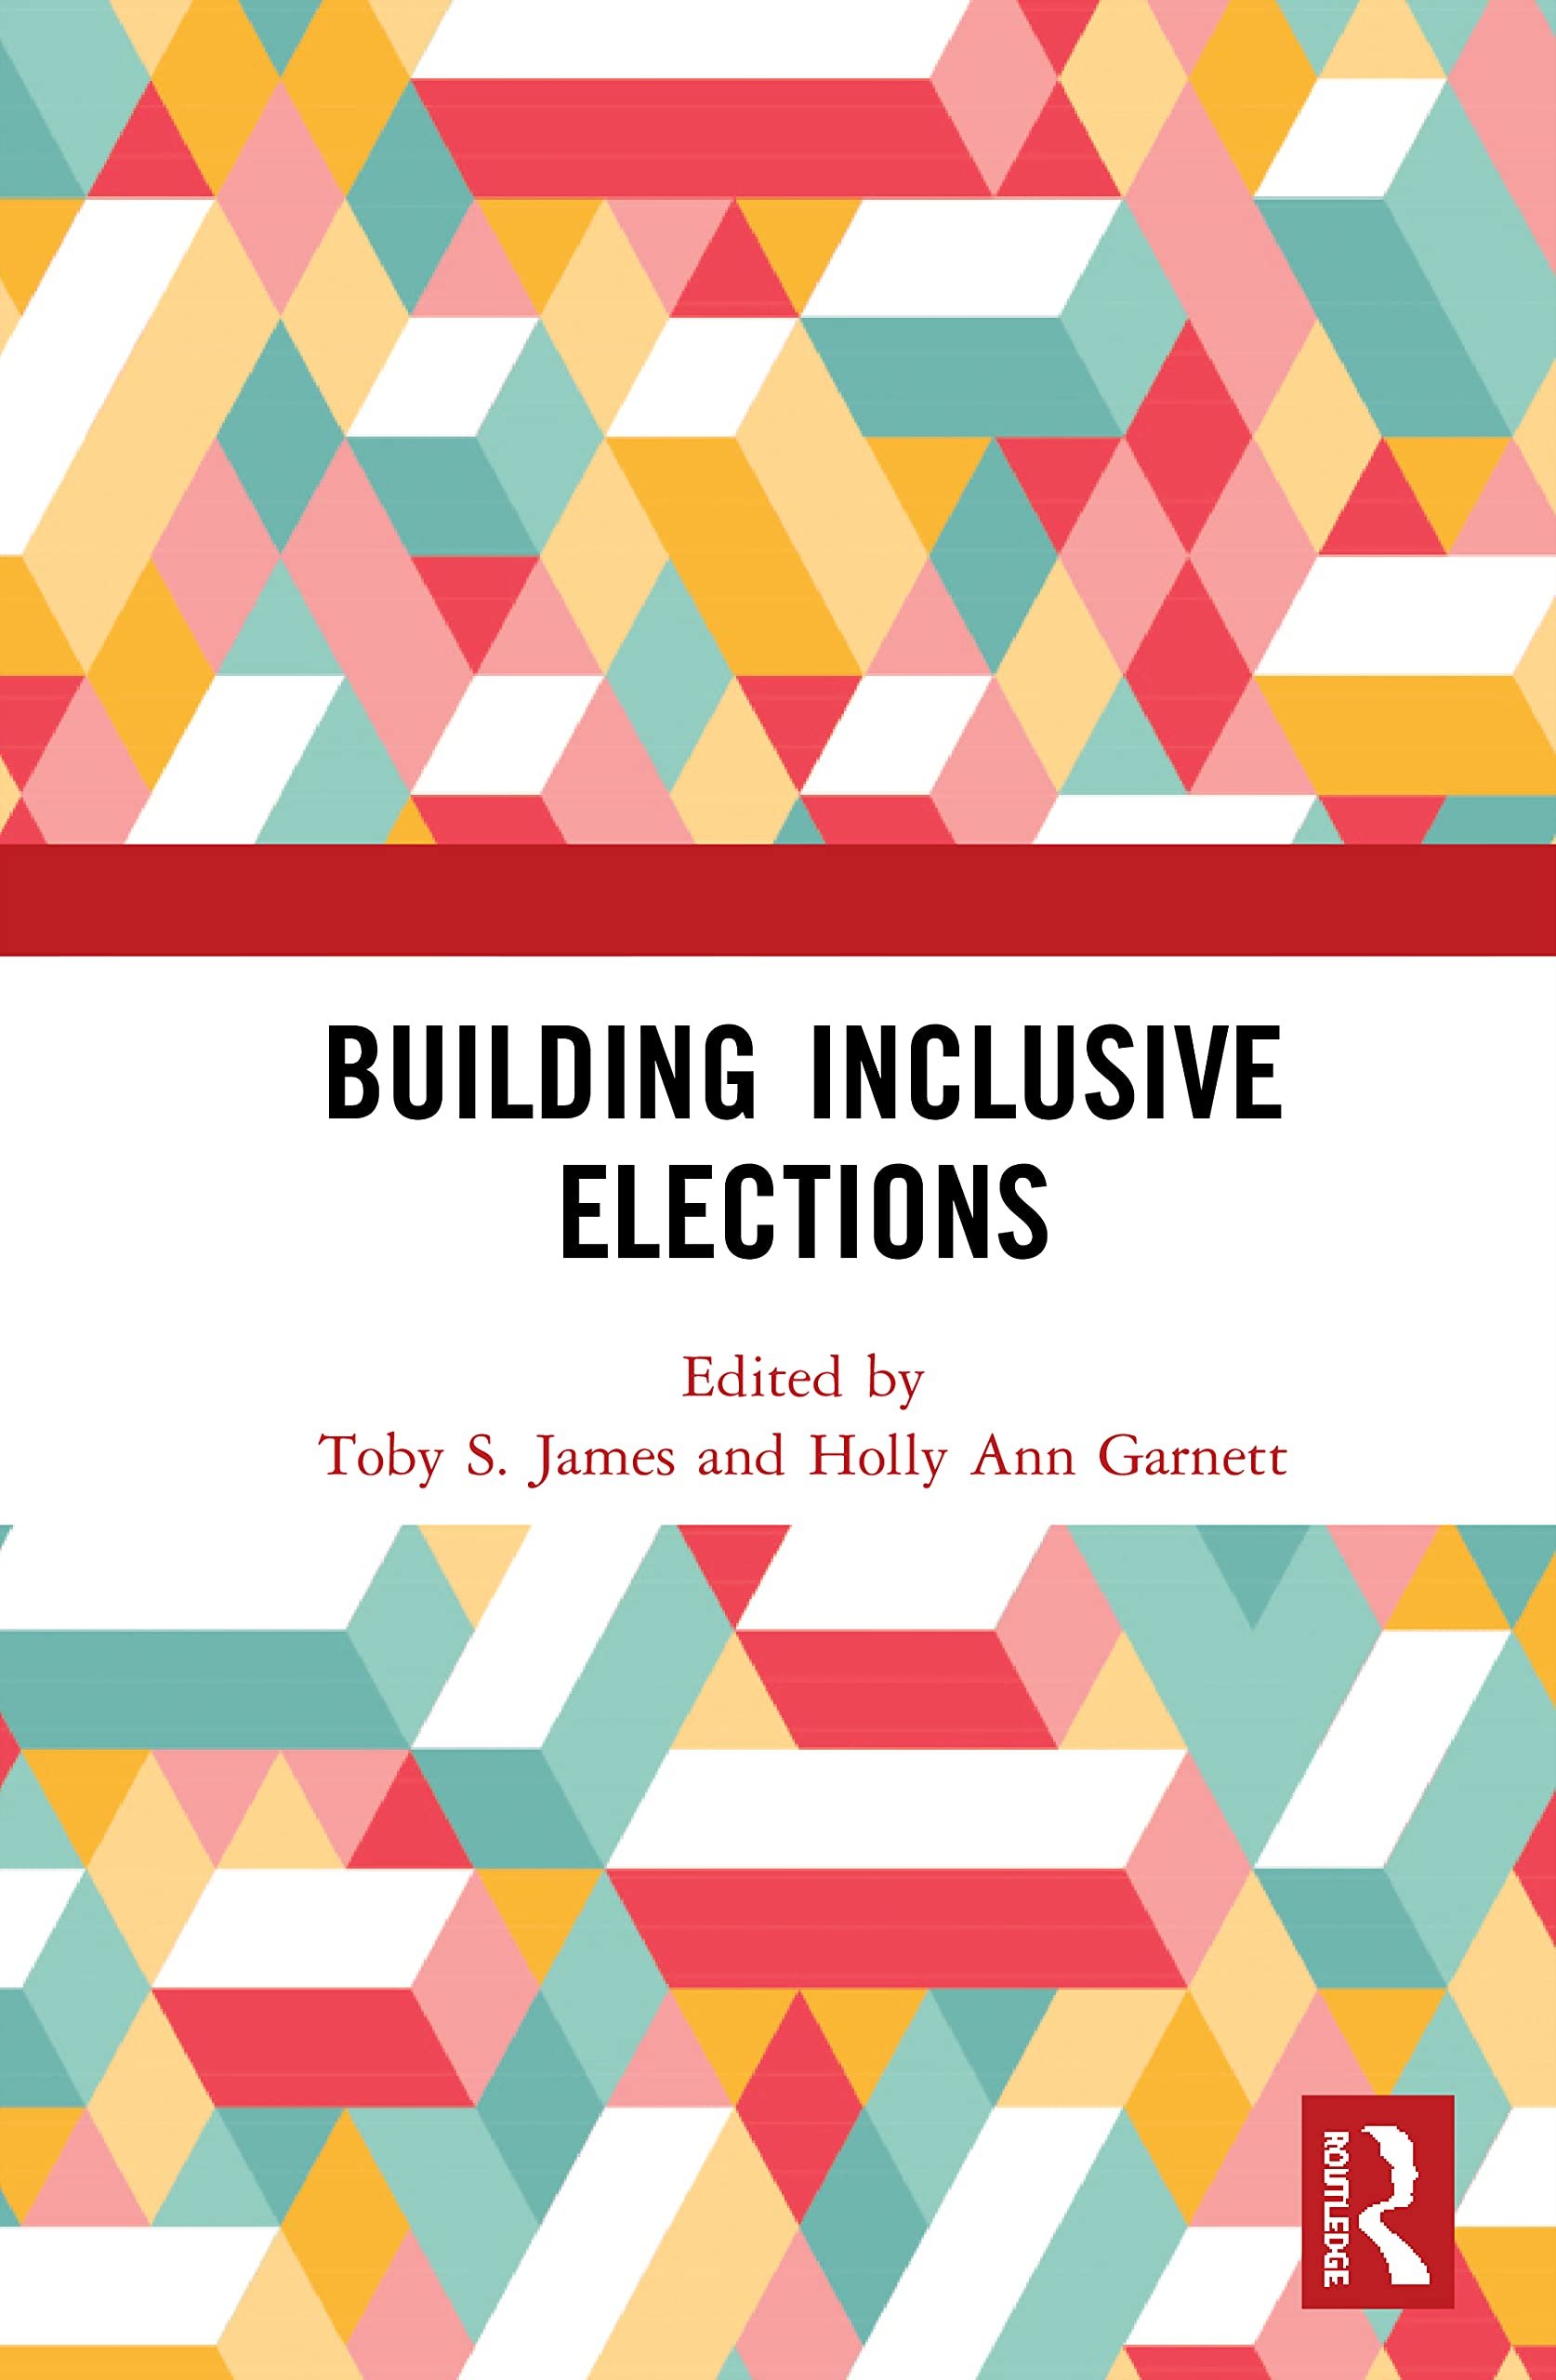 building-inclusive-elections cover.jpeg